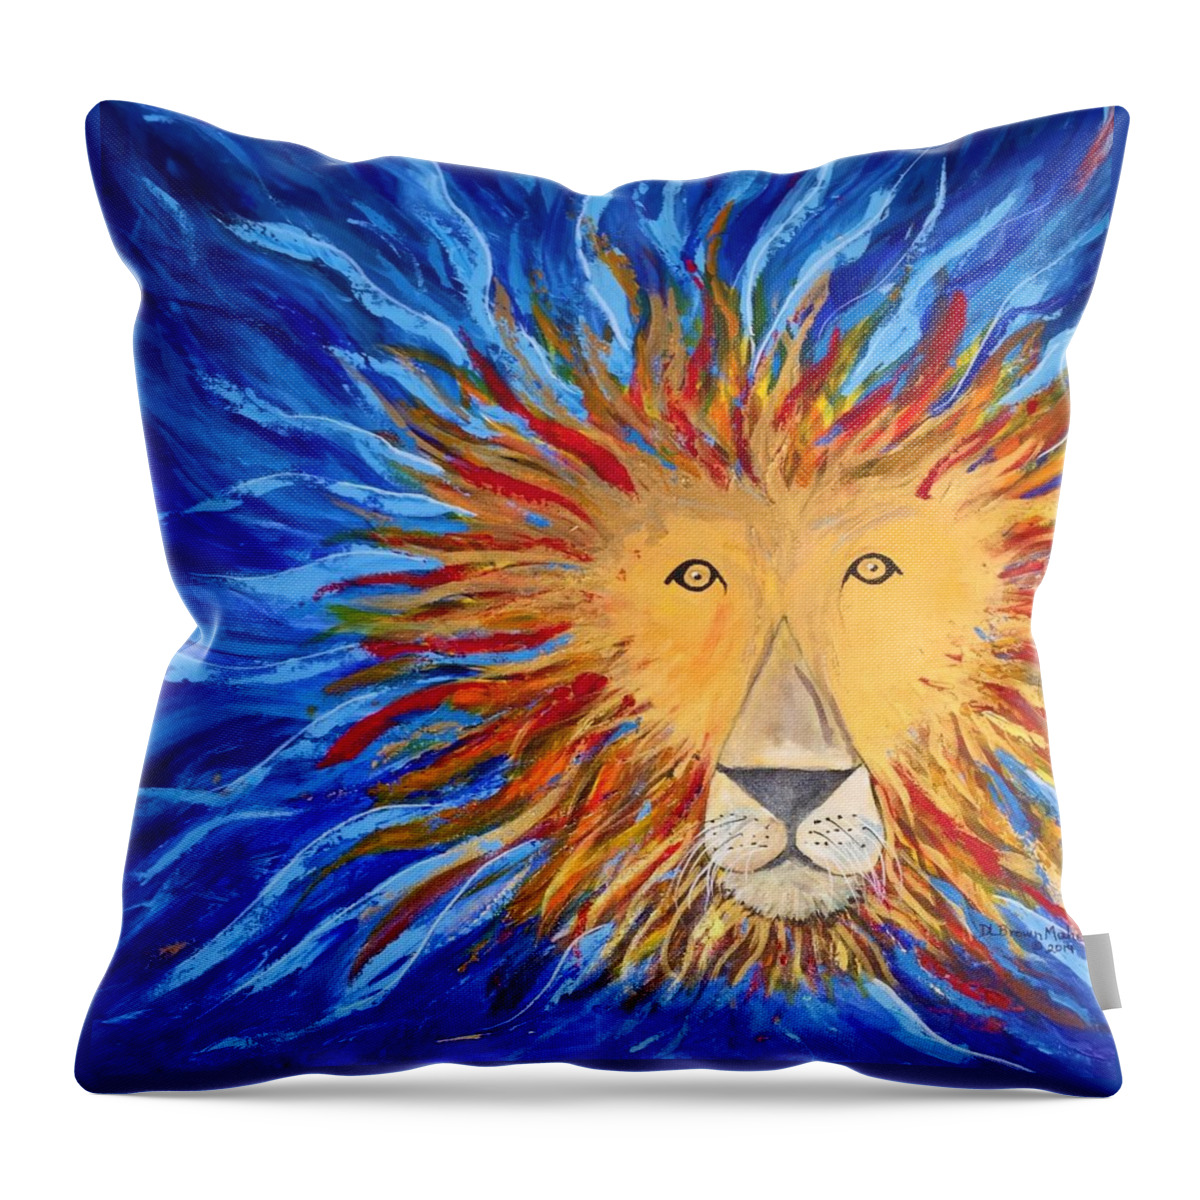 Lion Throw Pillow featuring the painting God Loves Us by Deb Brown Maher